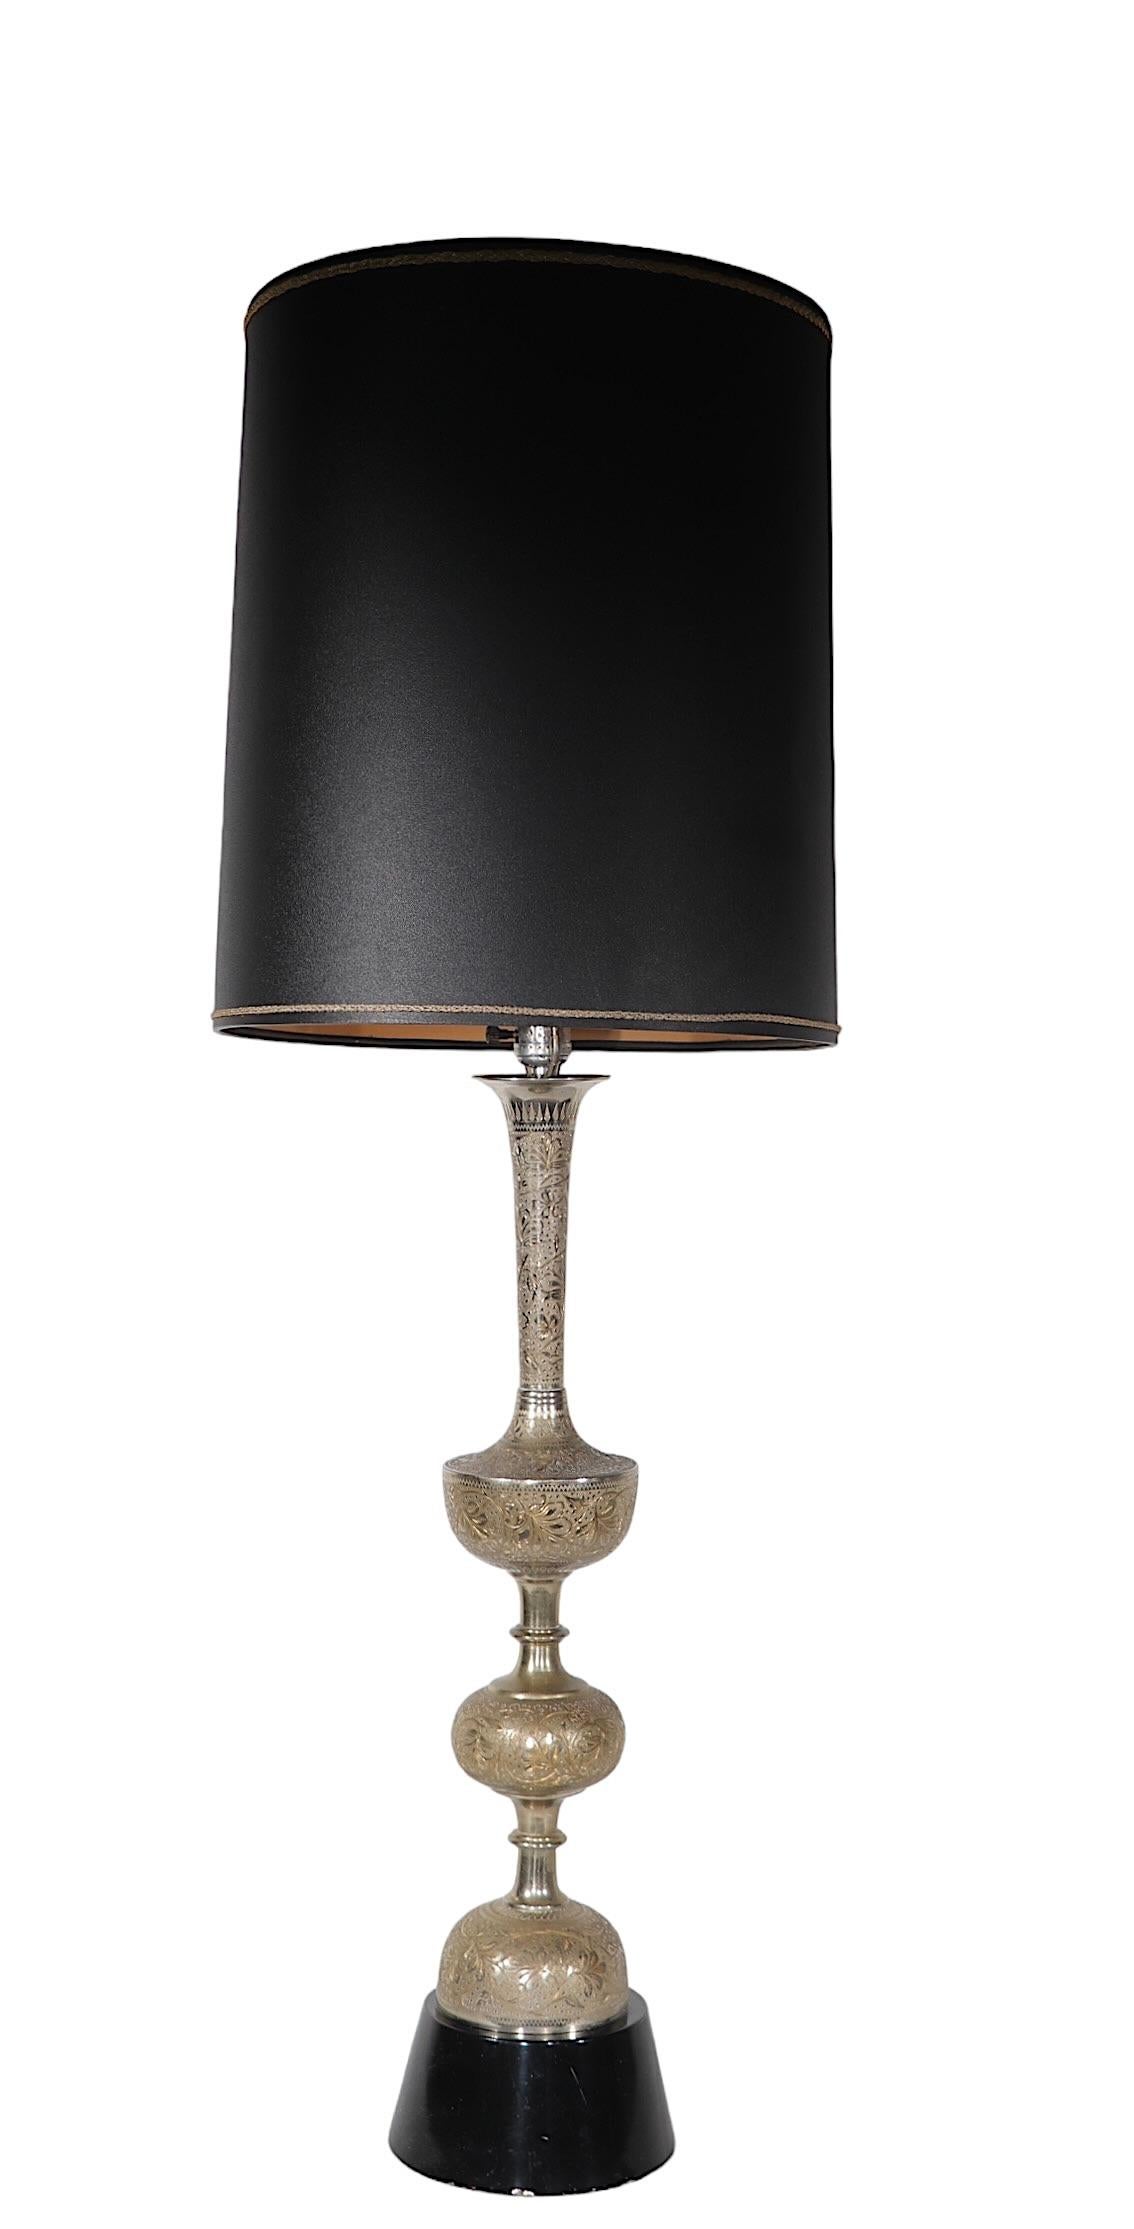  Large Vintage Table Lamp with Chased Silver Finish c. 1970's  For Sale 6